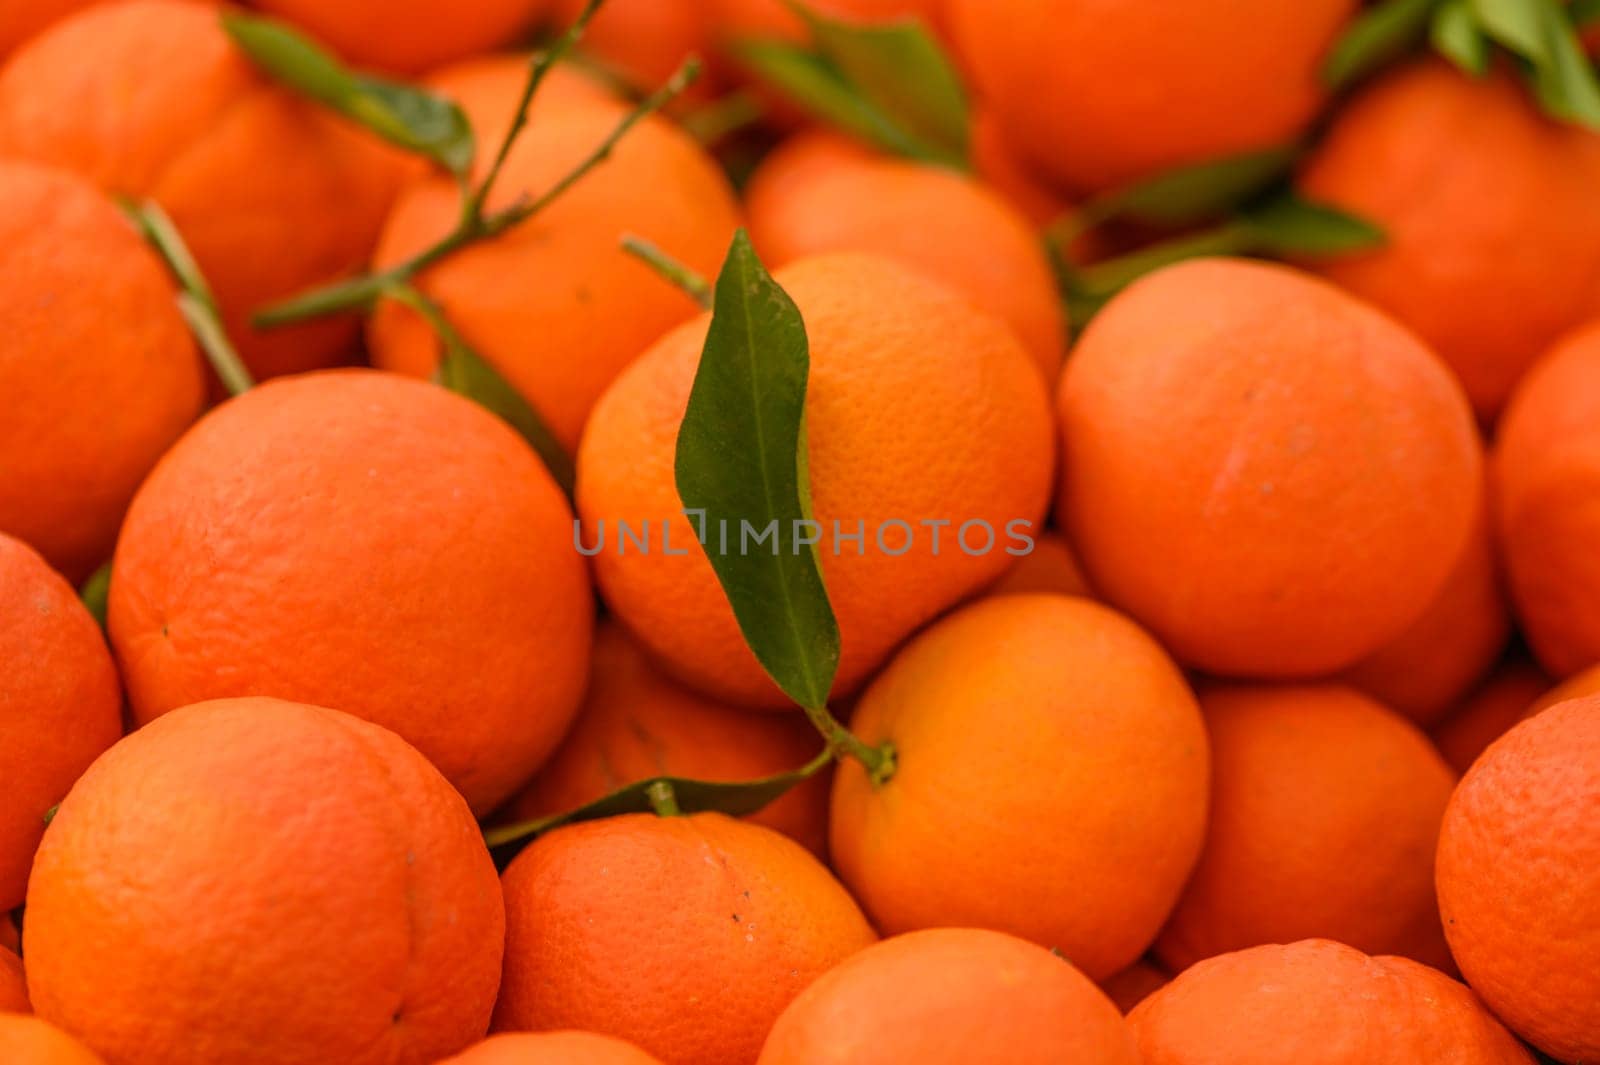 juicy fresh tangerines in boxes for sale in Cyprus in winter 5 by Mixa74